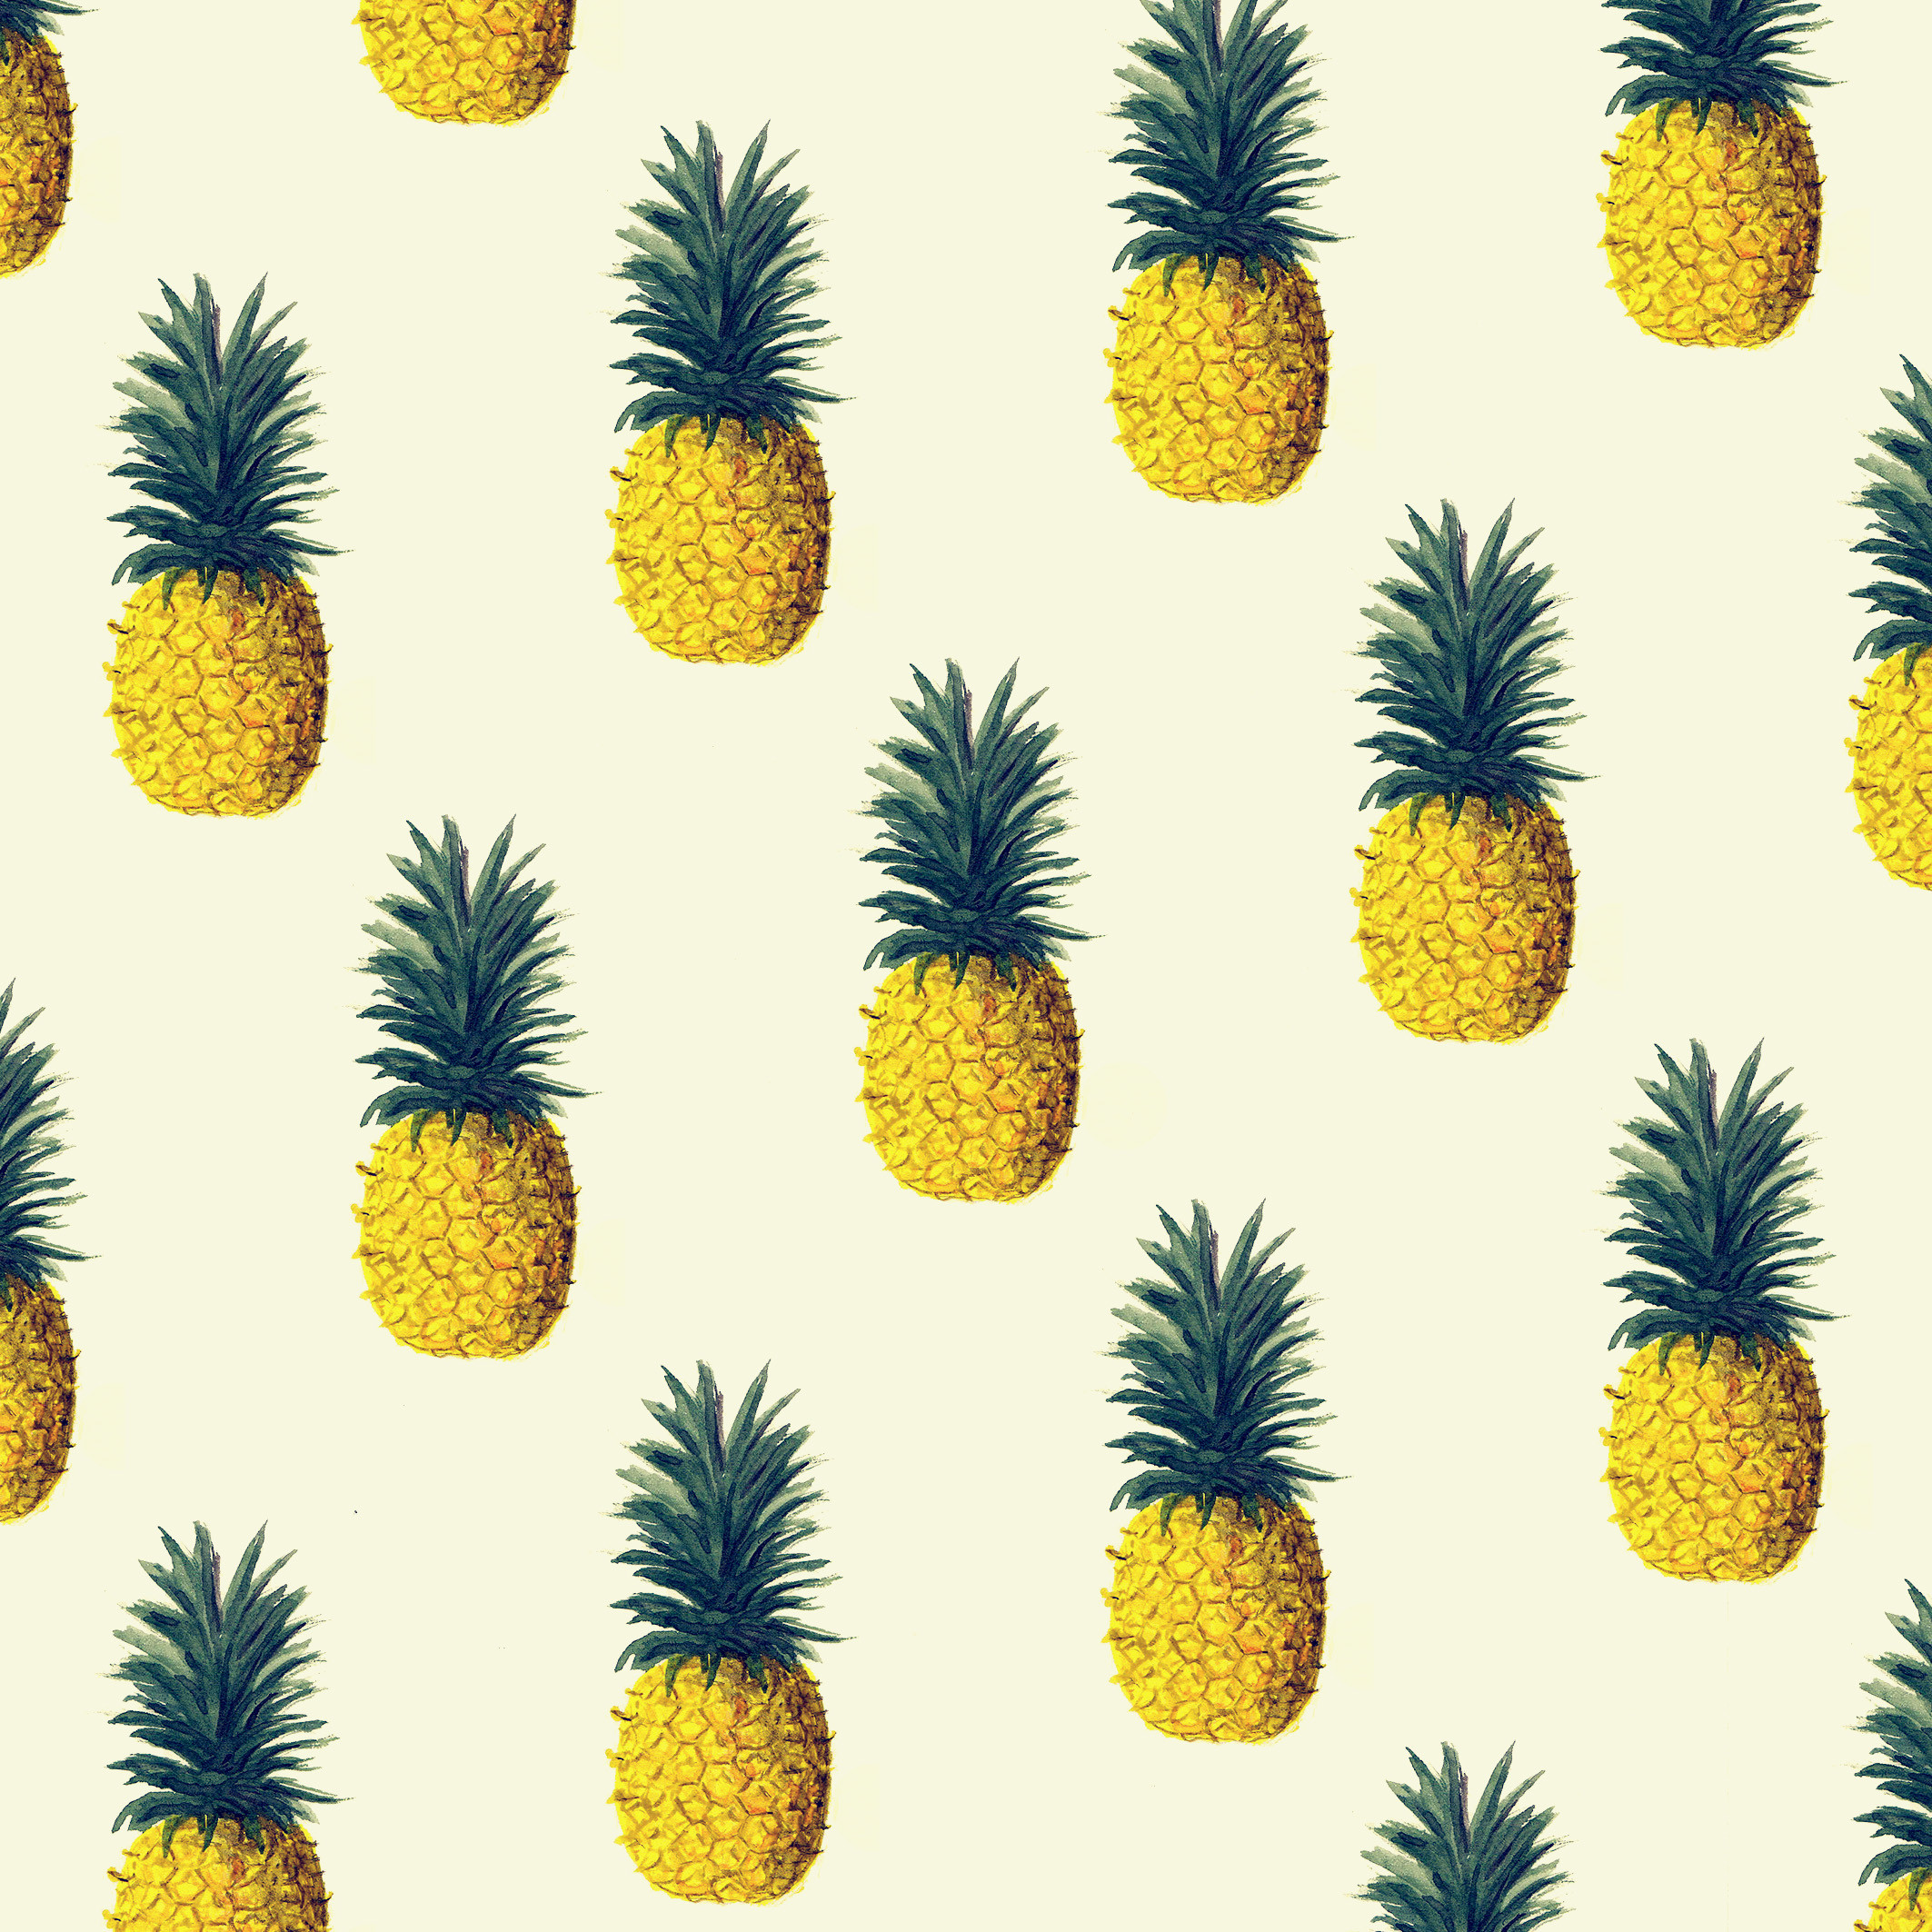 2126x2126 Pineapple HD Images 03690